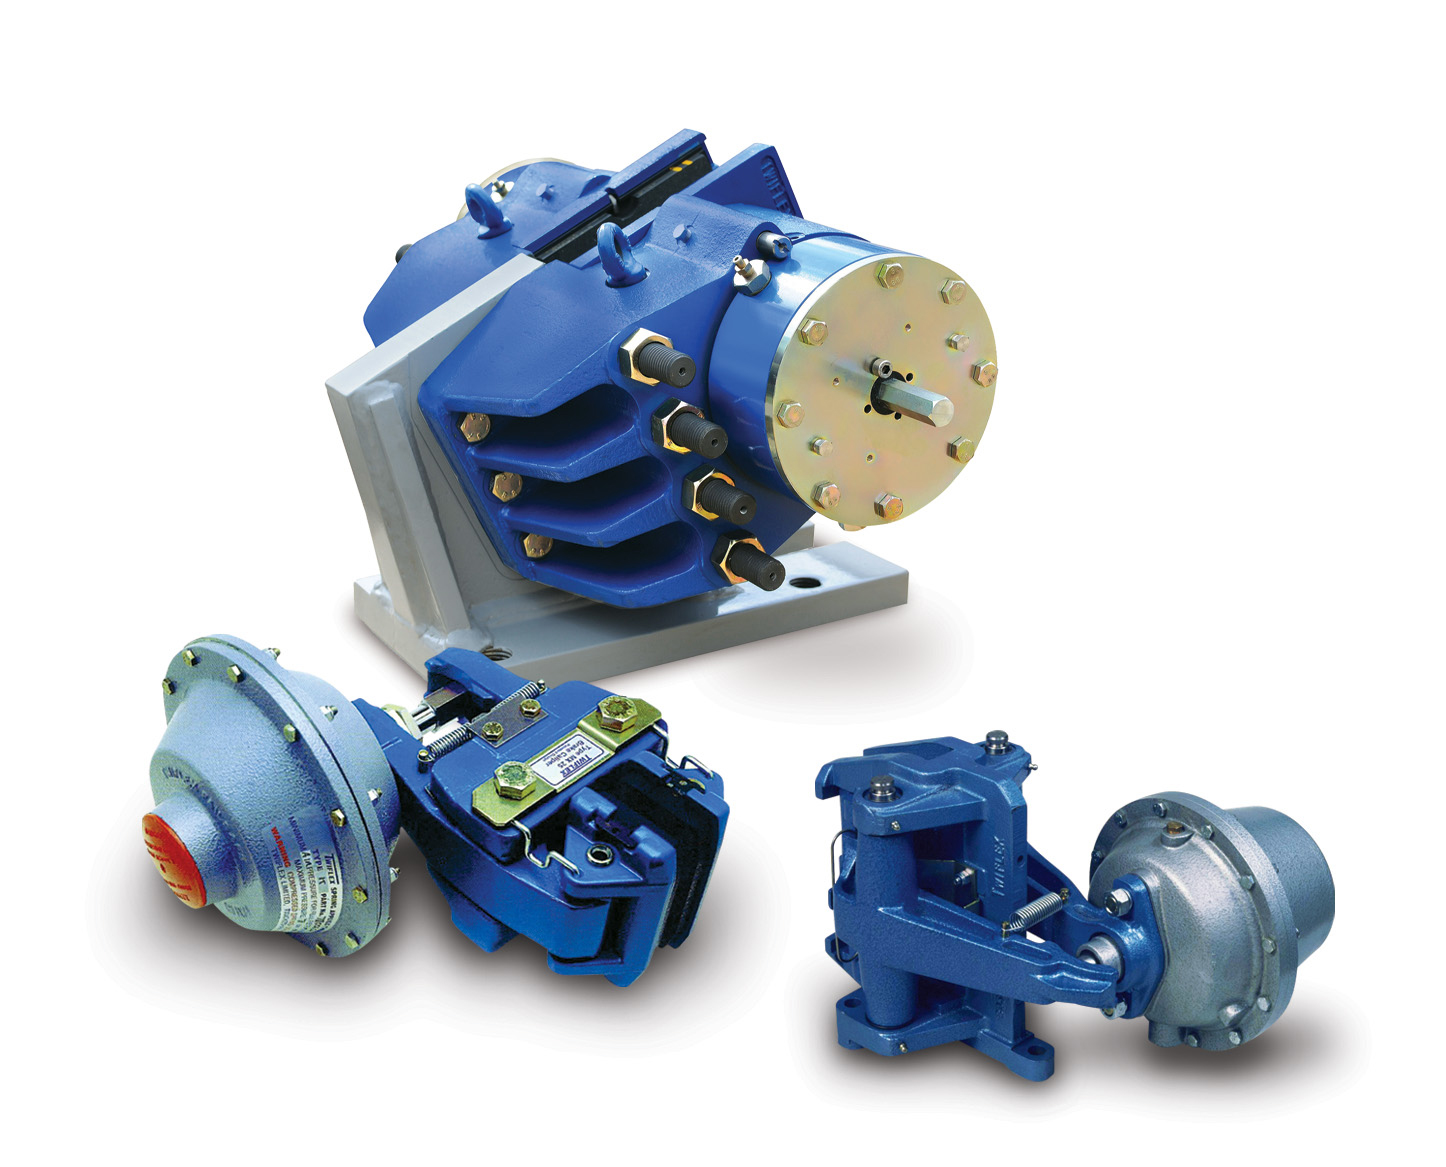 These Twiflex caliper brakes from Twiflex USA (via Altra Industrial Motion) are suitable for mining, metals, and marine applications.